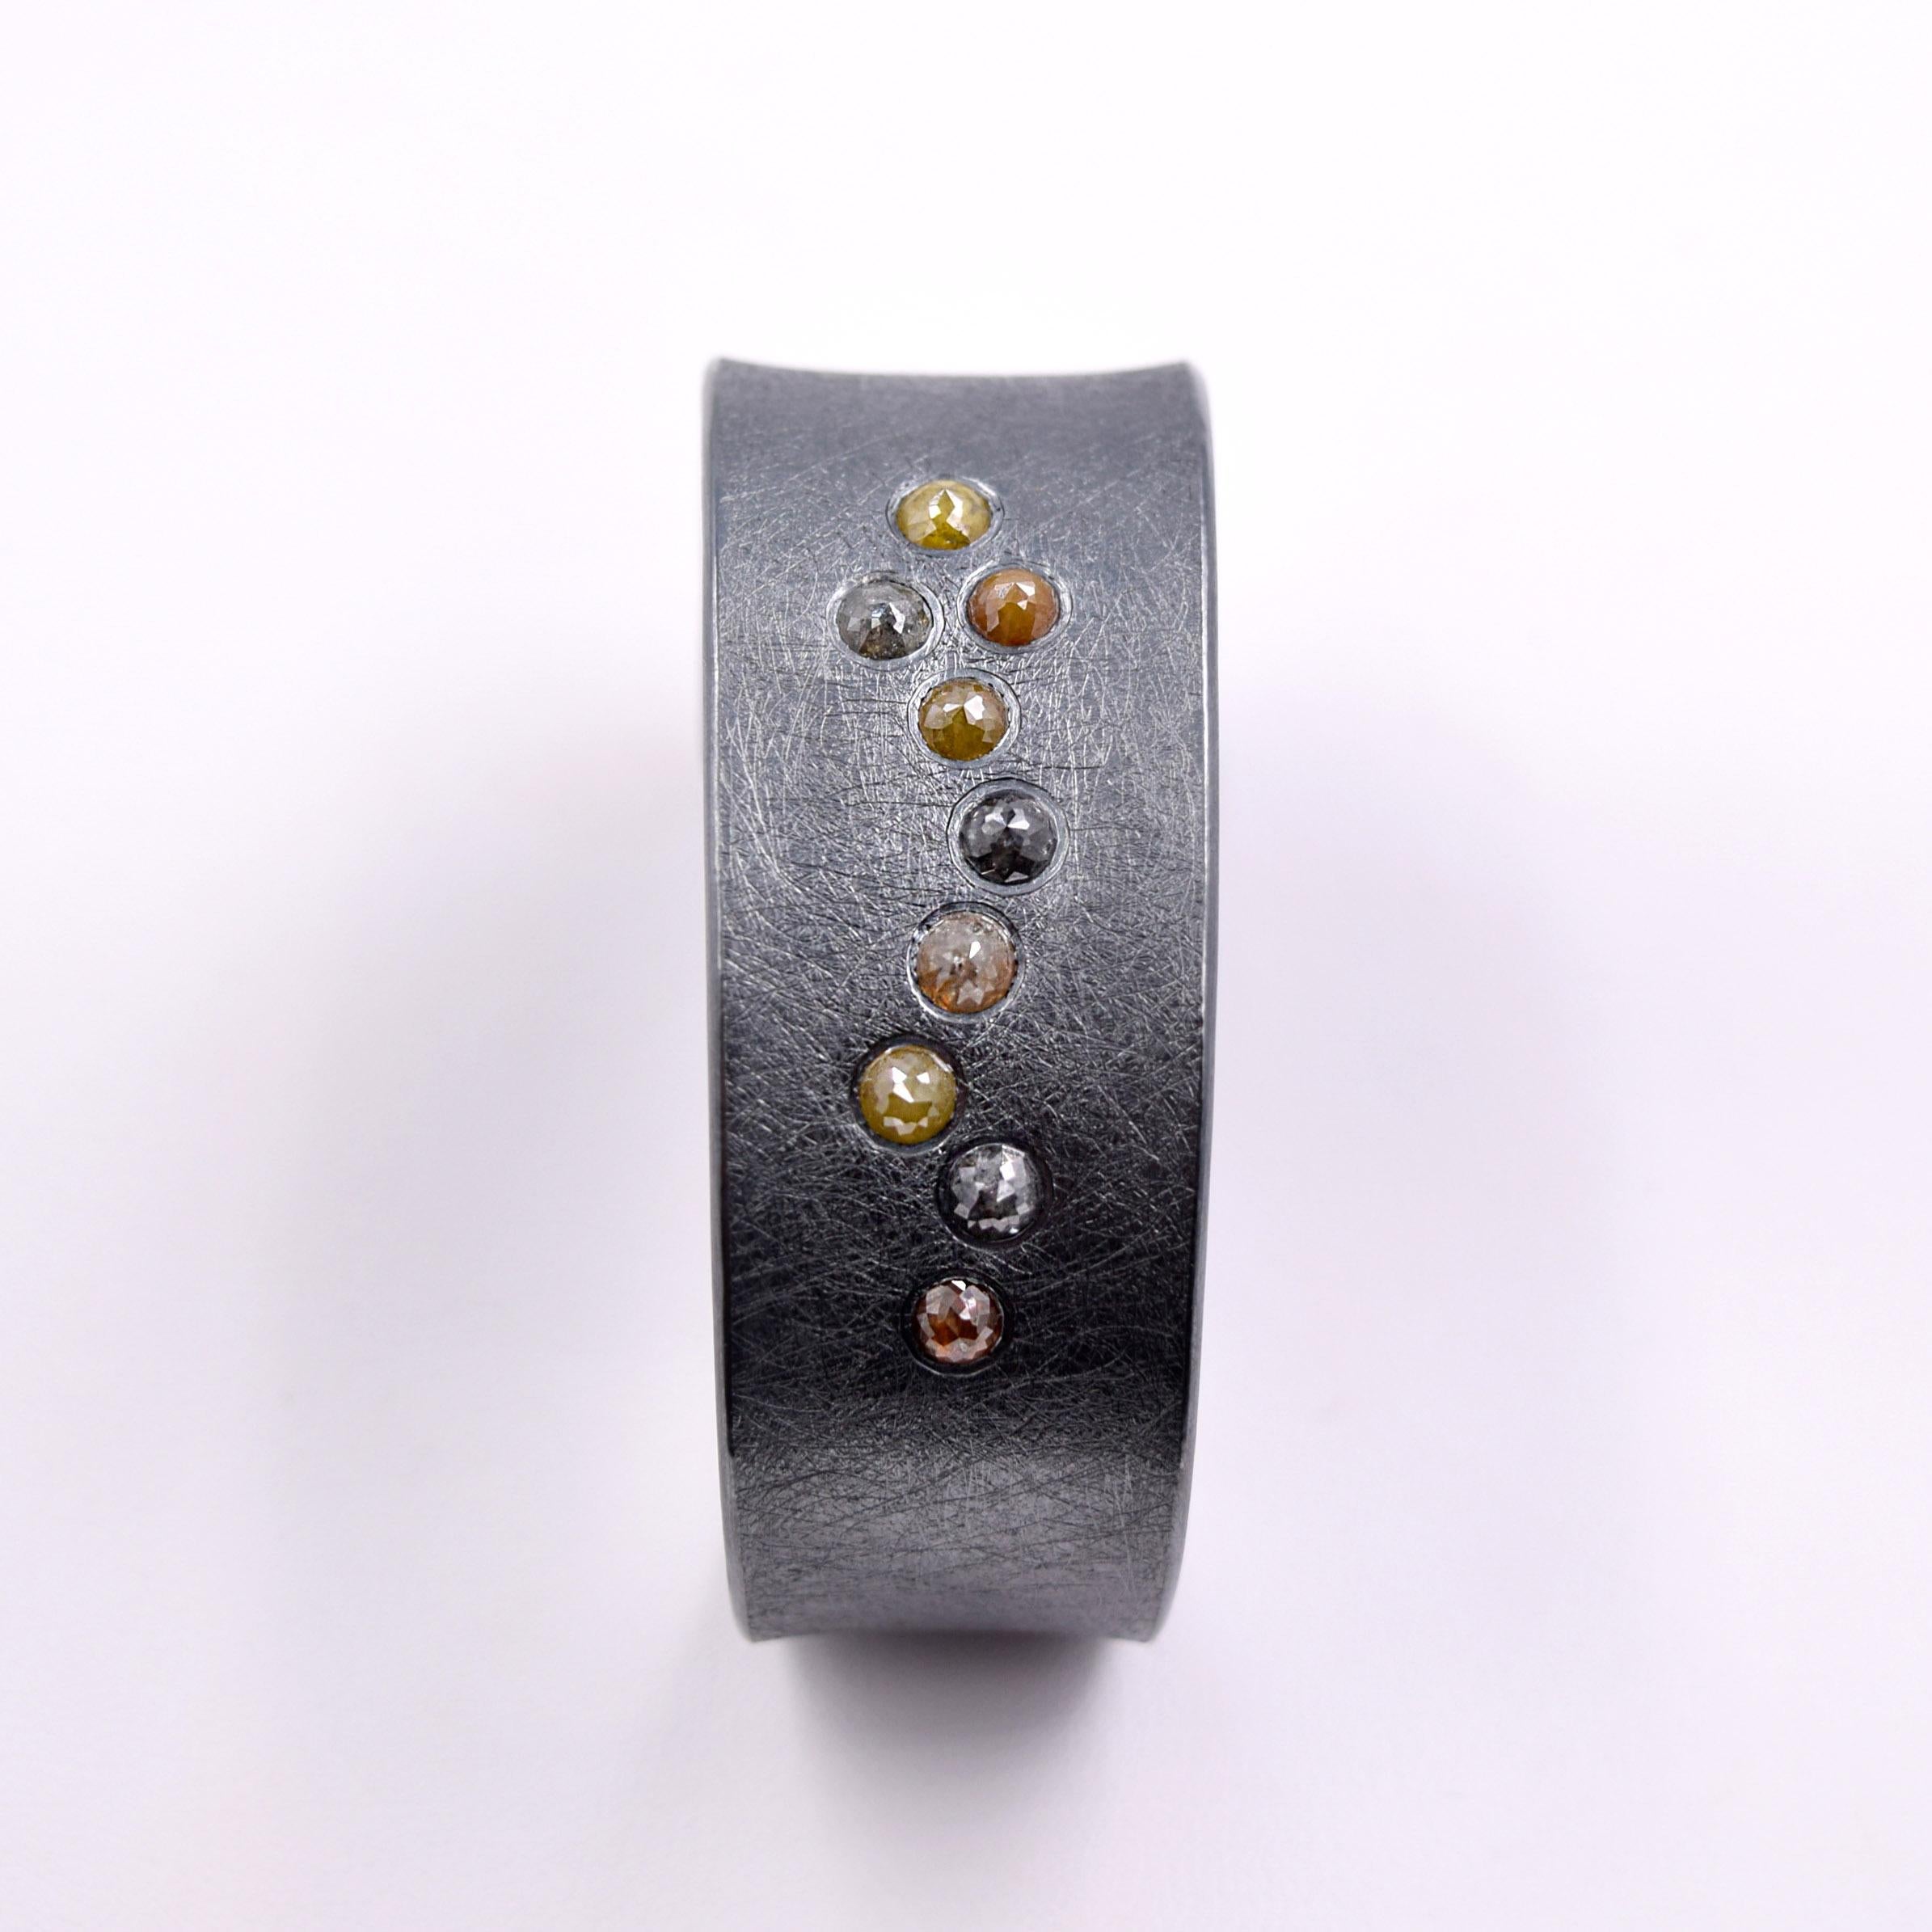 Todd Reed's iconic Bracelet is a hand forged and textured piece of wearable art.
Colored rose cut Diamonds give this piece of Jewelry the edgy refinement that Jewelry wearers have come to expect from Todd Reed.
4.48 Carats of Diamonds set in a